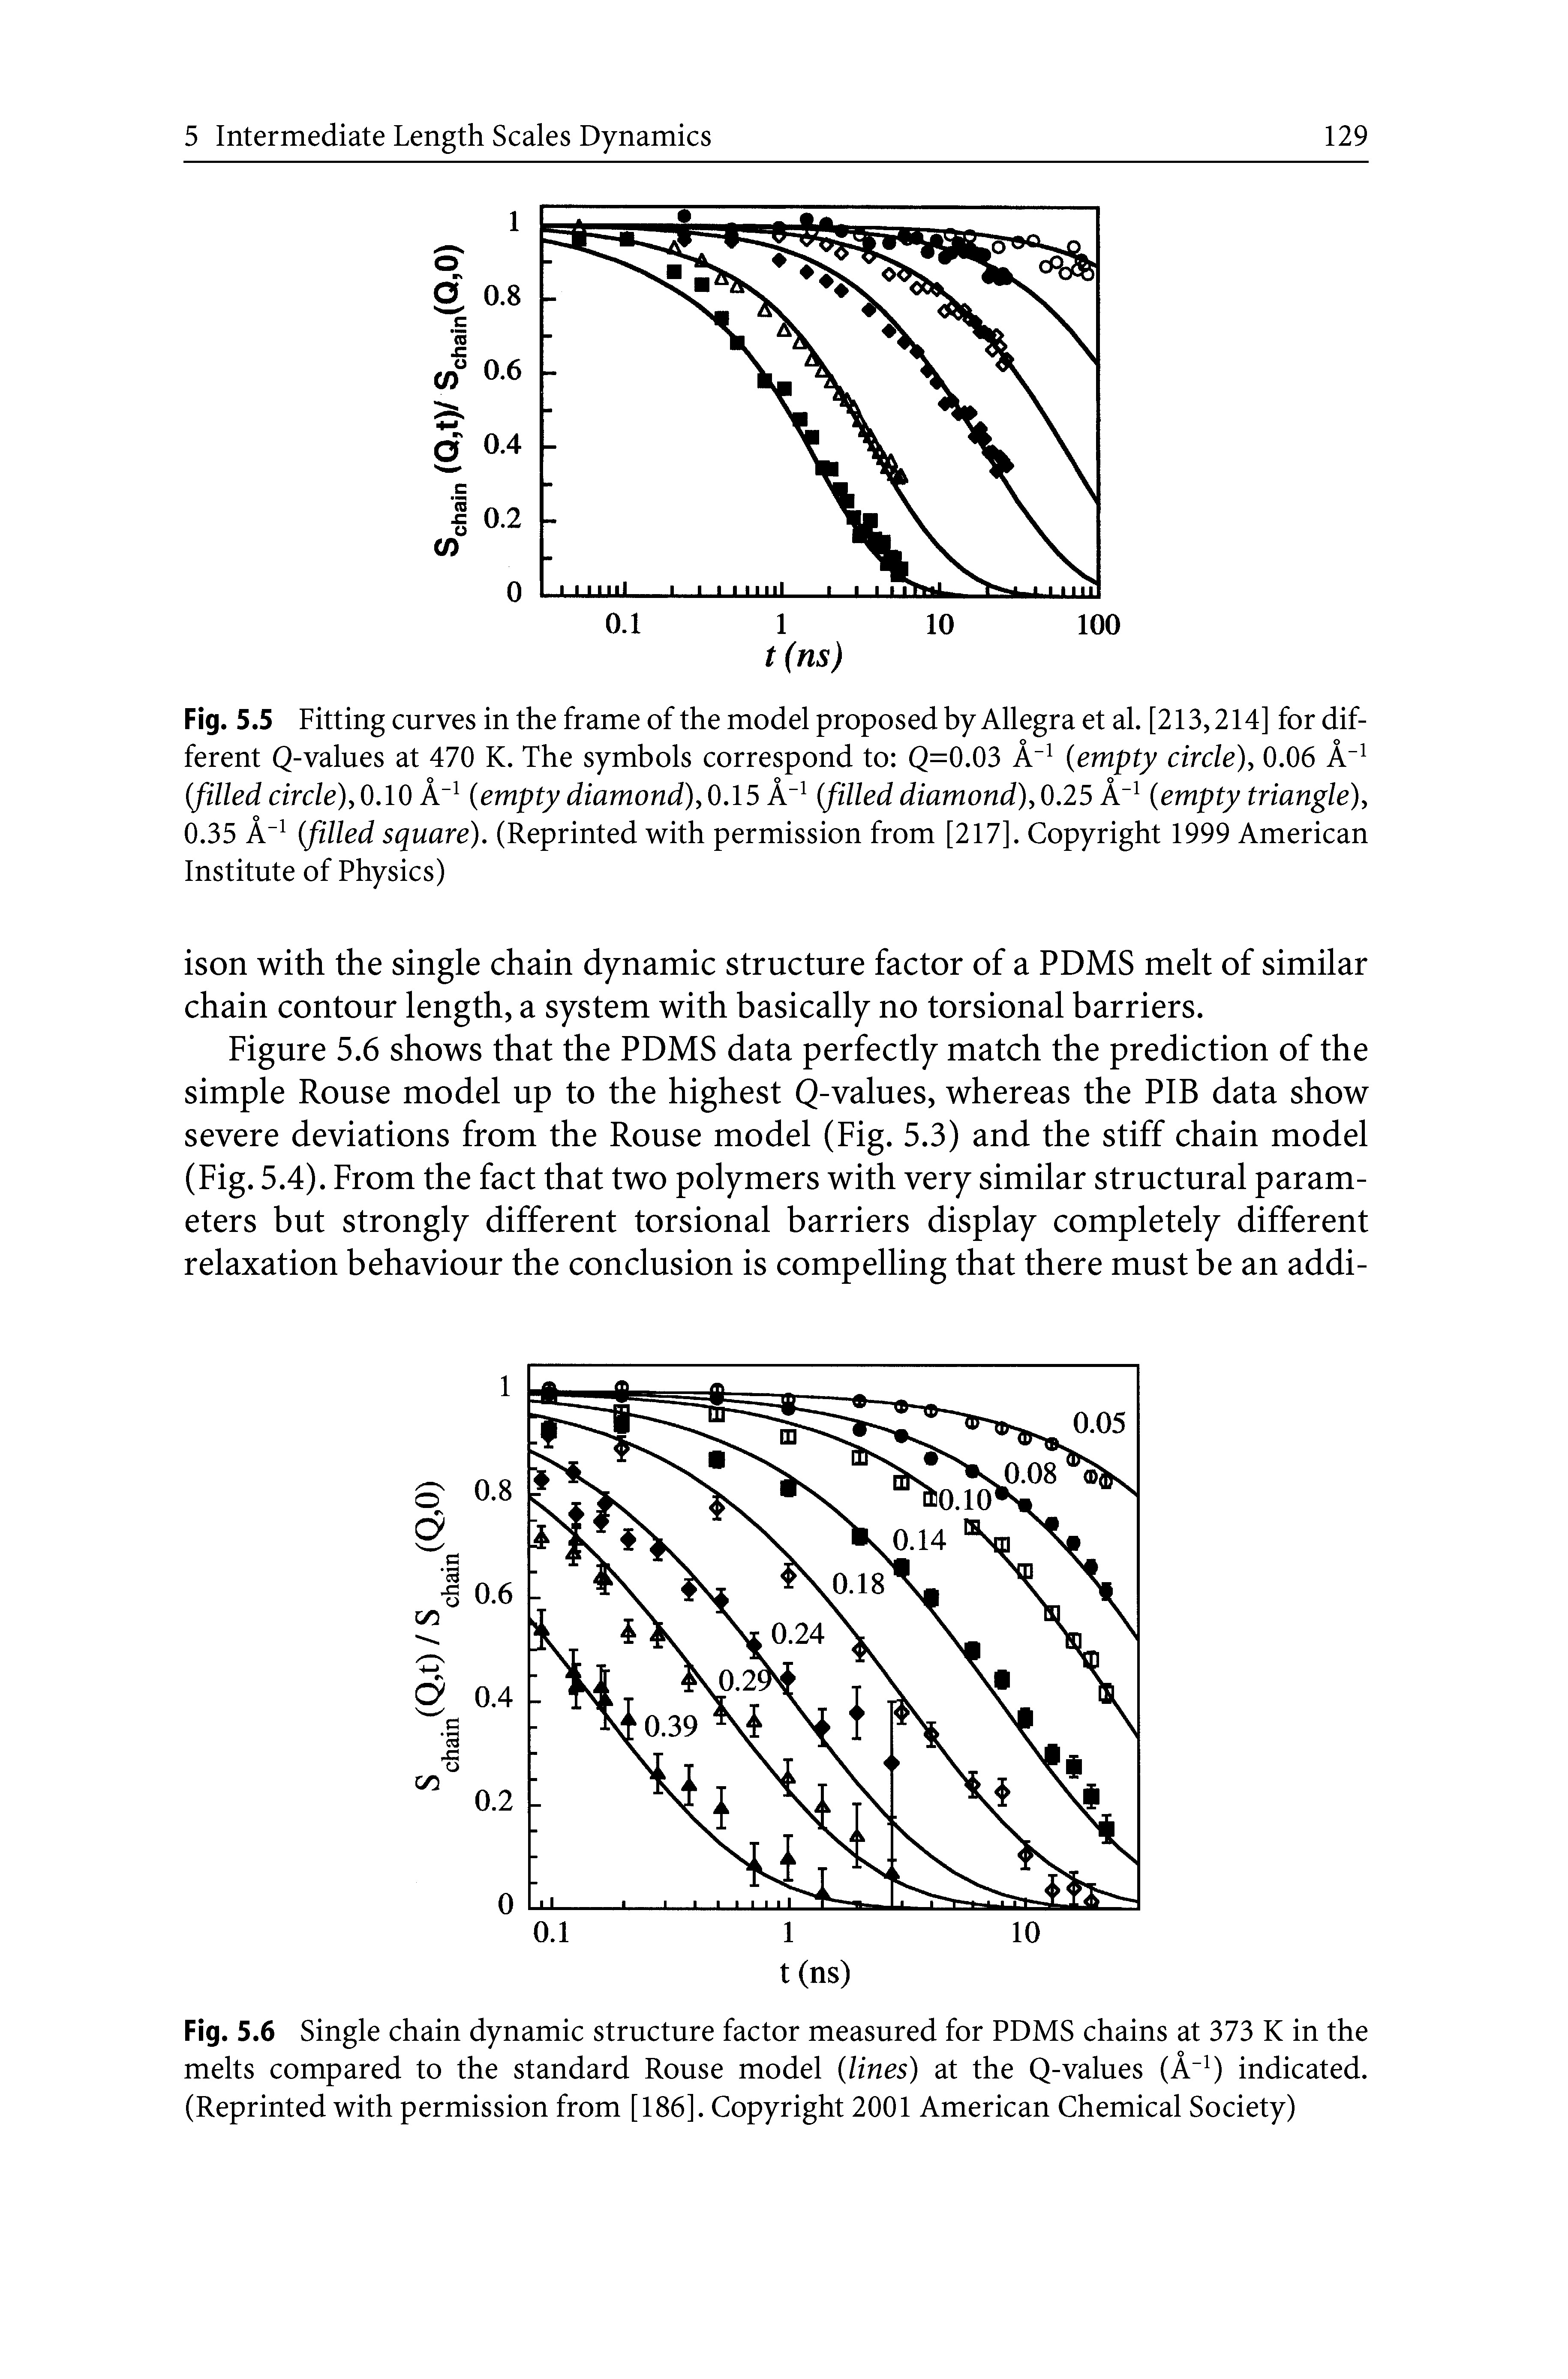 Fig. 5.6 Single chain dynamic structure factor measured for PDMS chains at 373 K in the melts compared to the standard Rouse model (lines) at the Q-values (A Q indicated. (Reprinted with permission from [186]. Copyright 2001 American Chemical Society)...